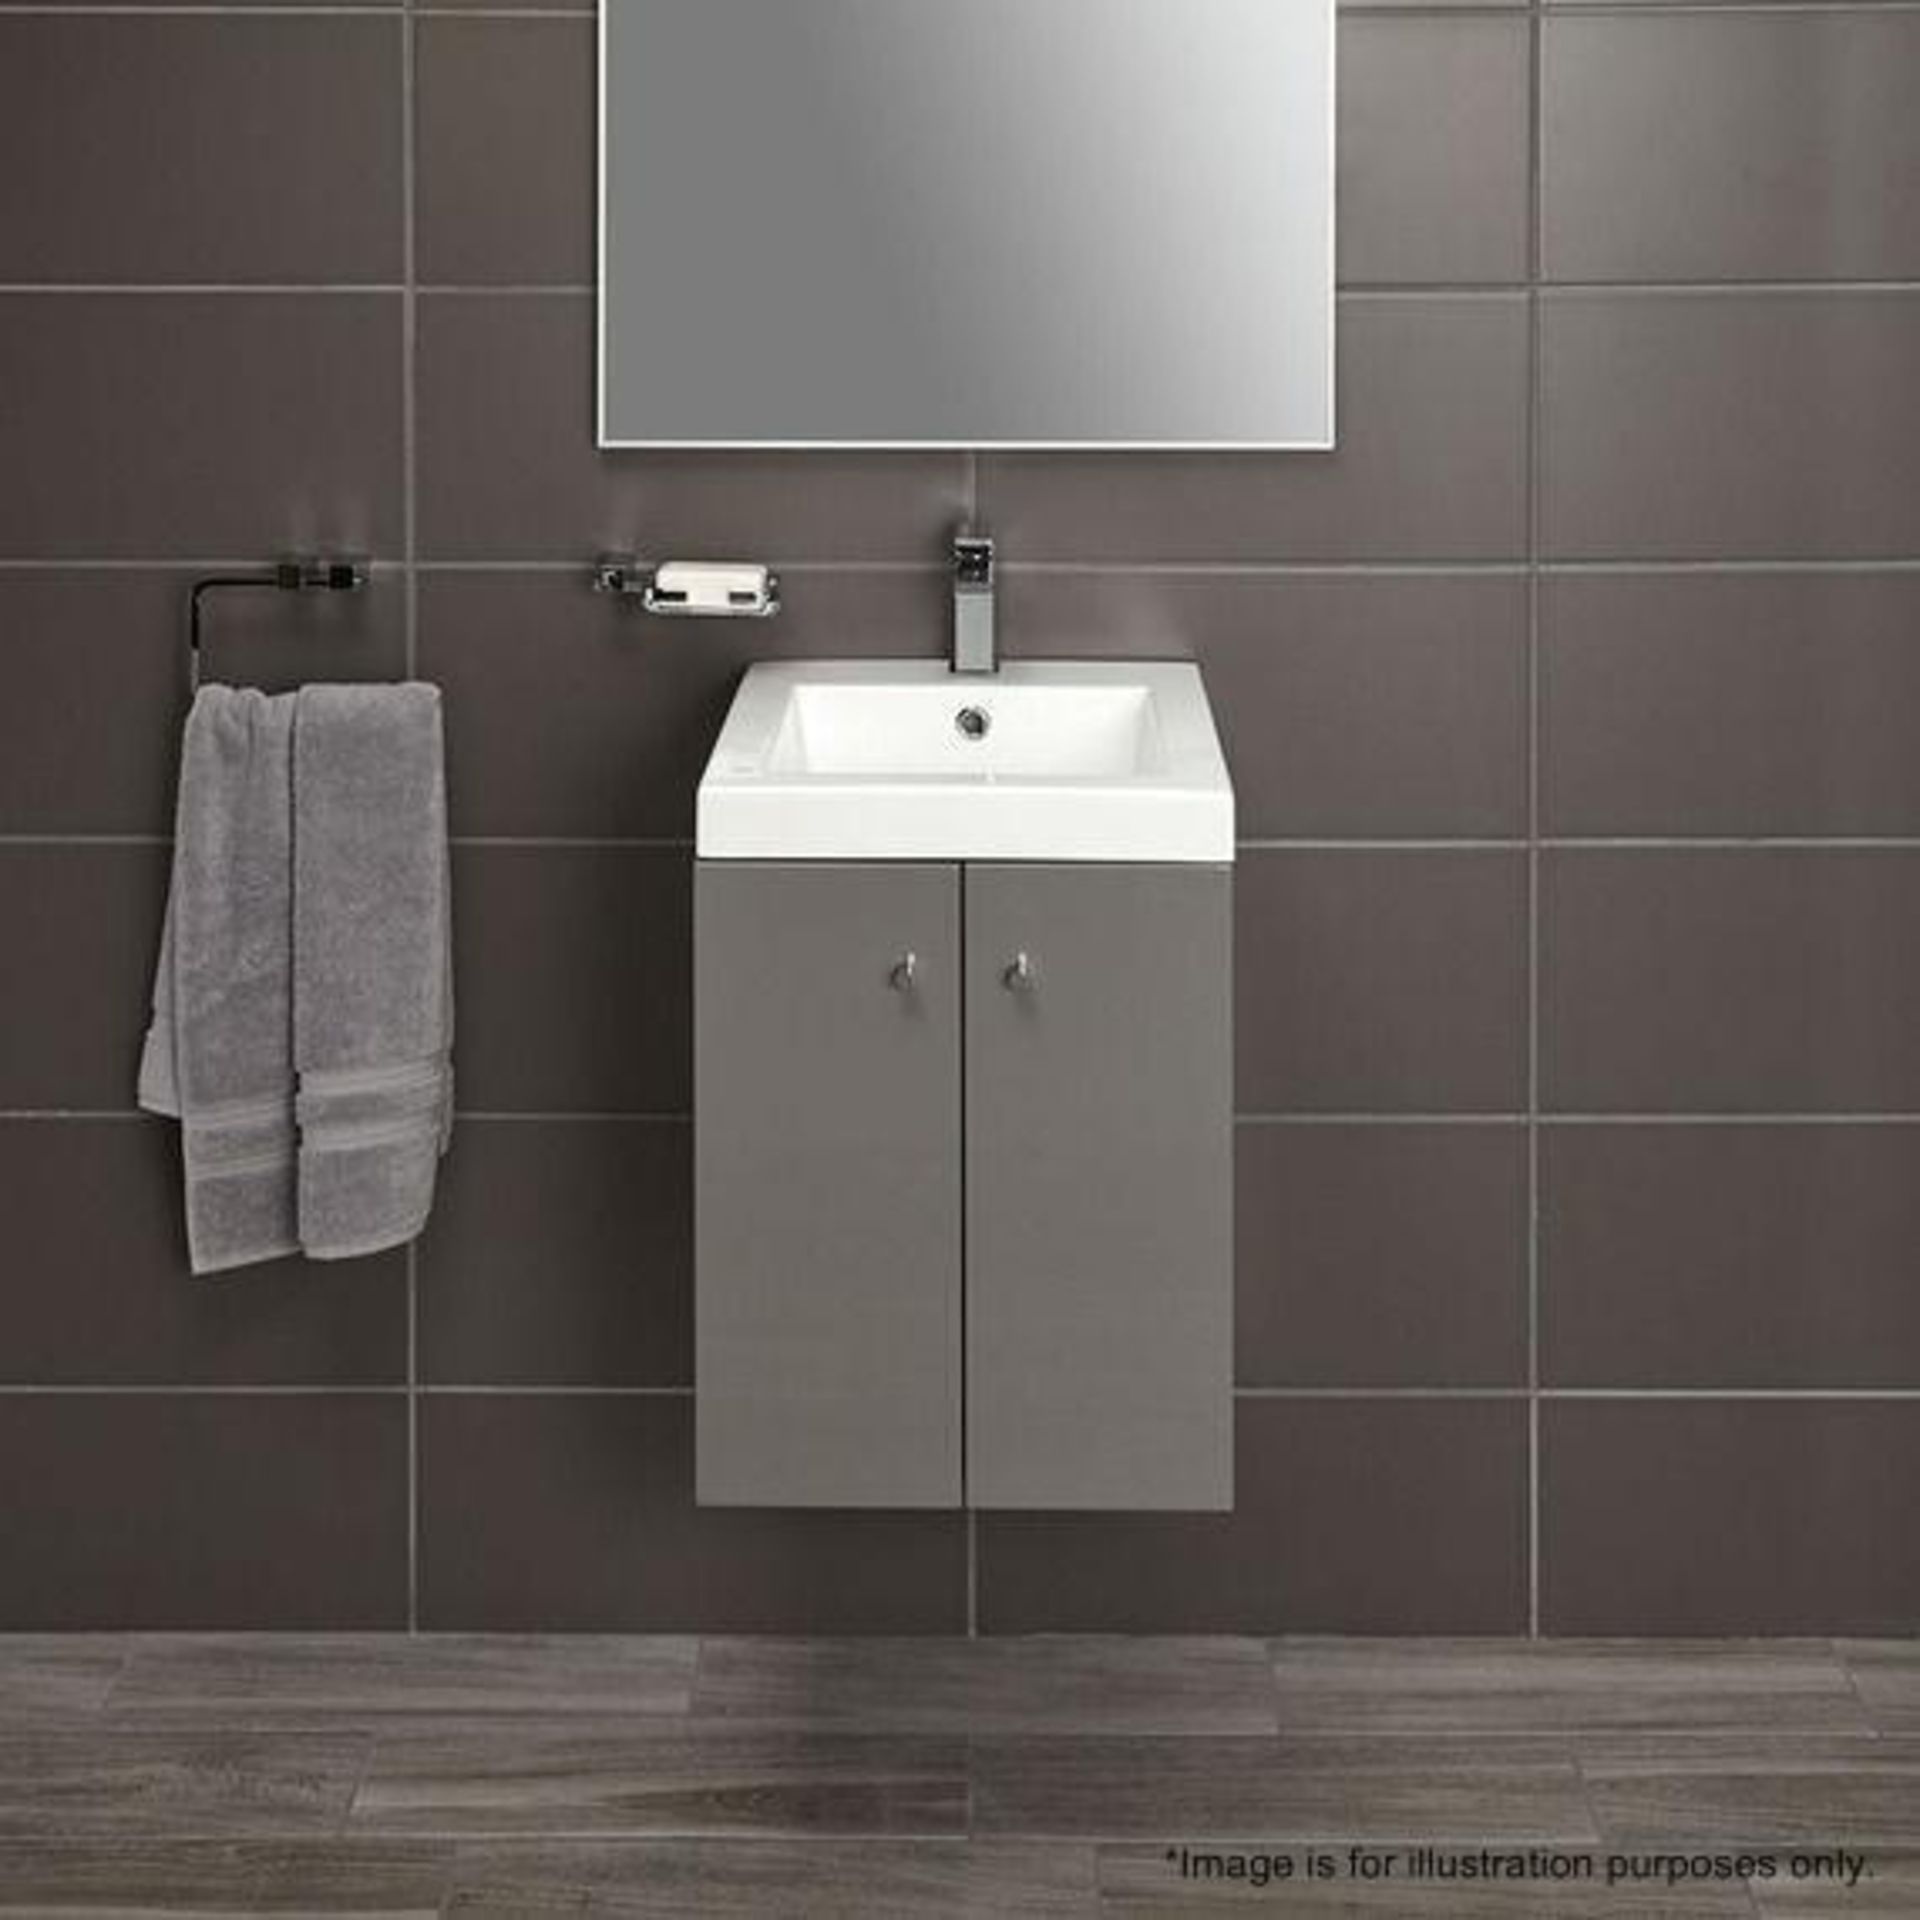 10 x Alpine Duo 400 Wall Hung Vanity Units In Gloss Grey - Brand New Boxed Stock - Dimensions: H49 x - Image 3 of 5